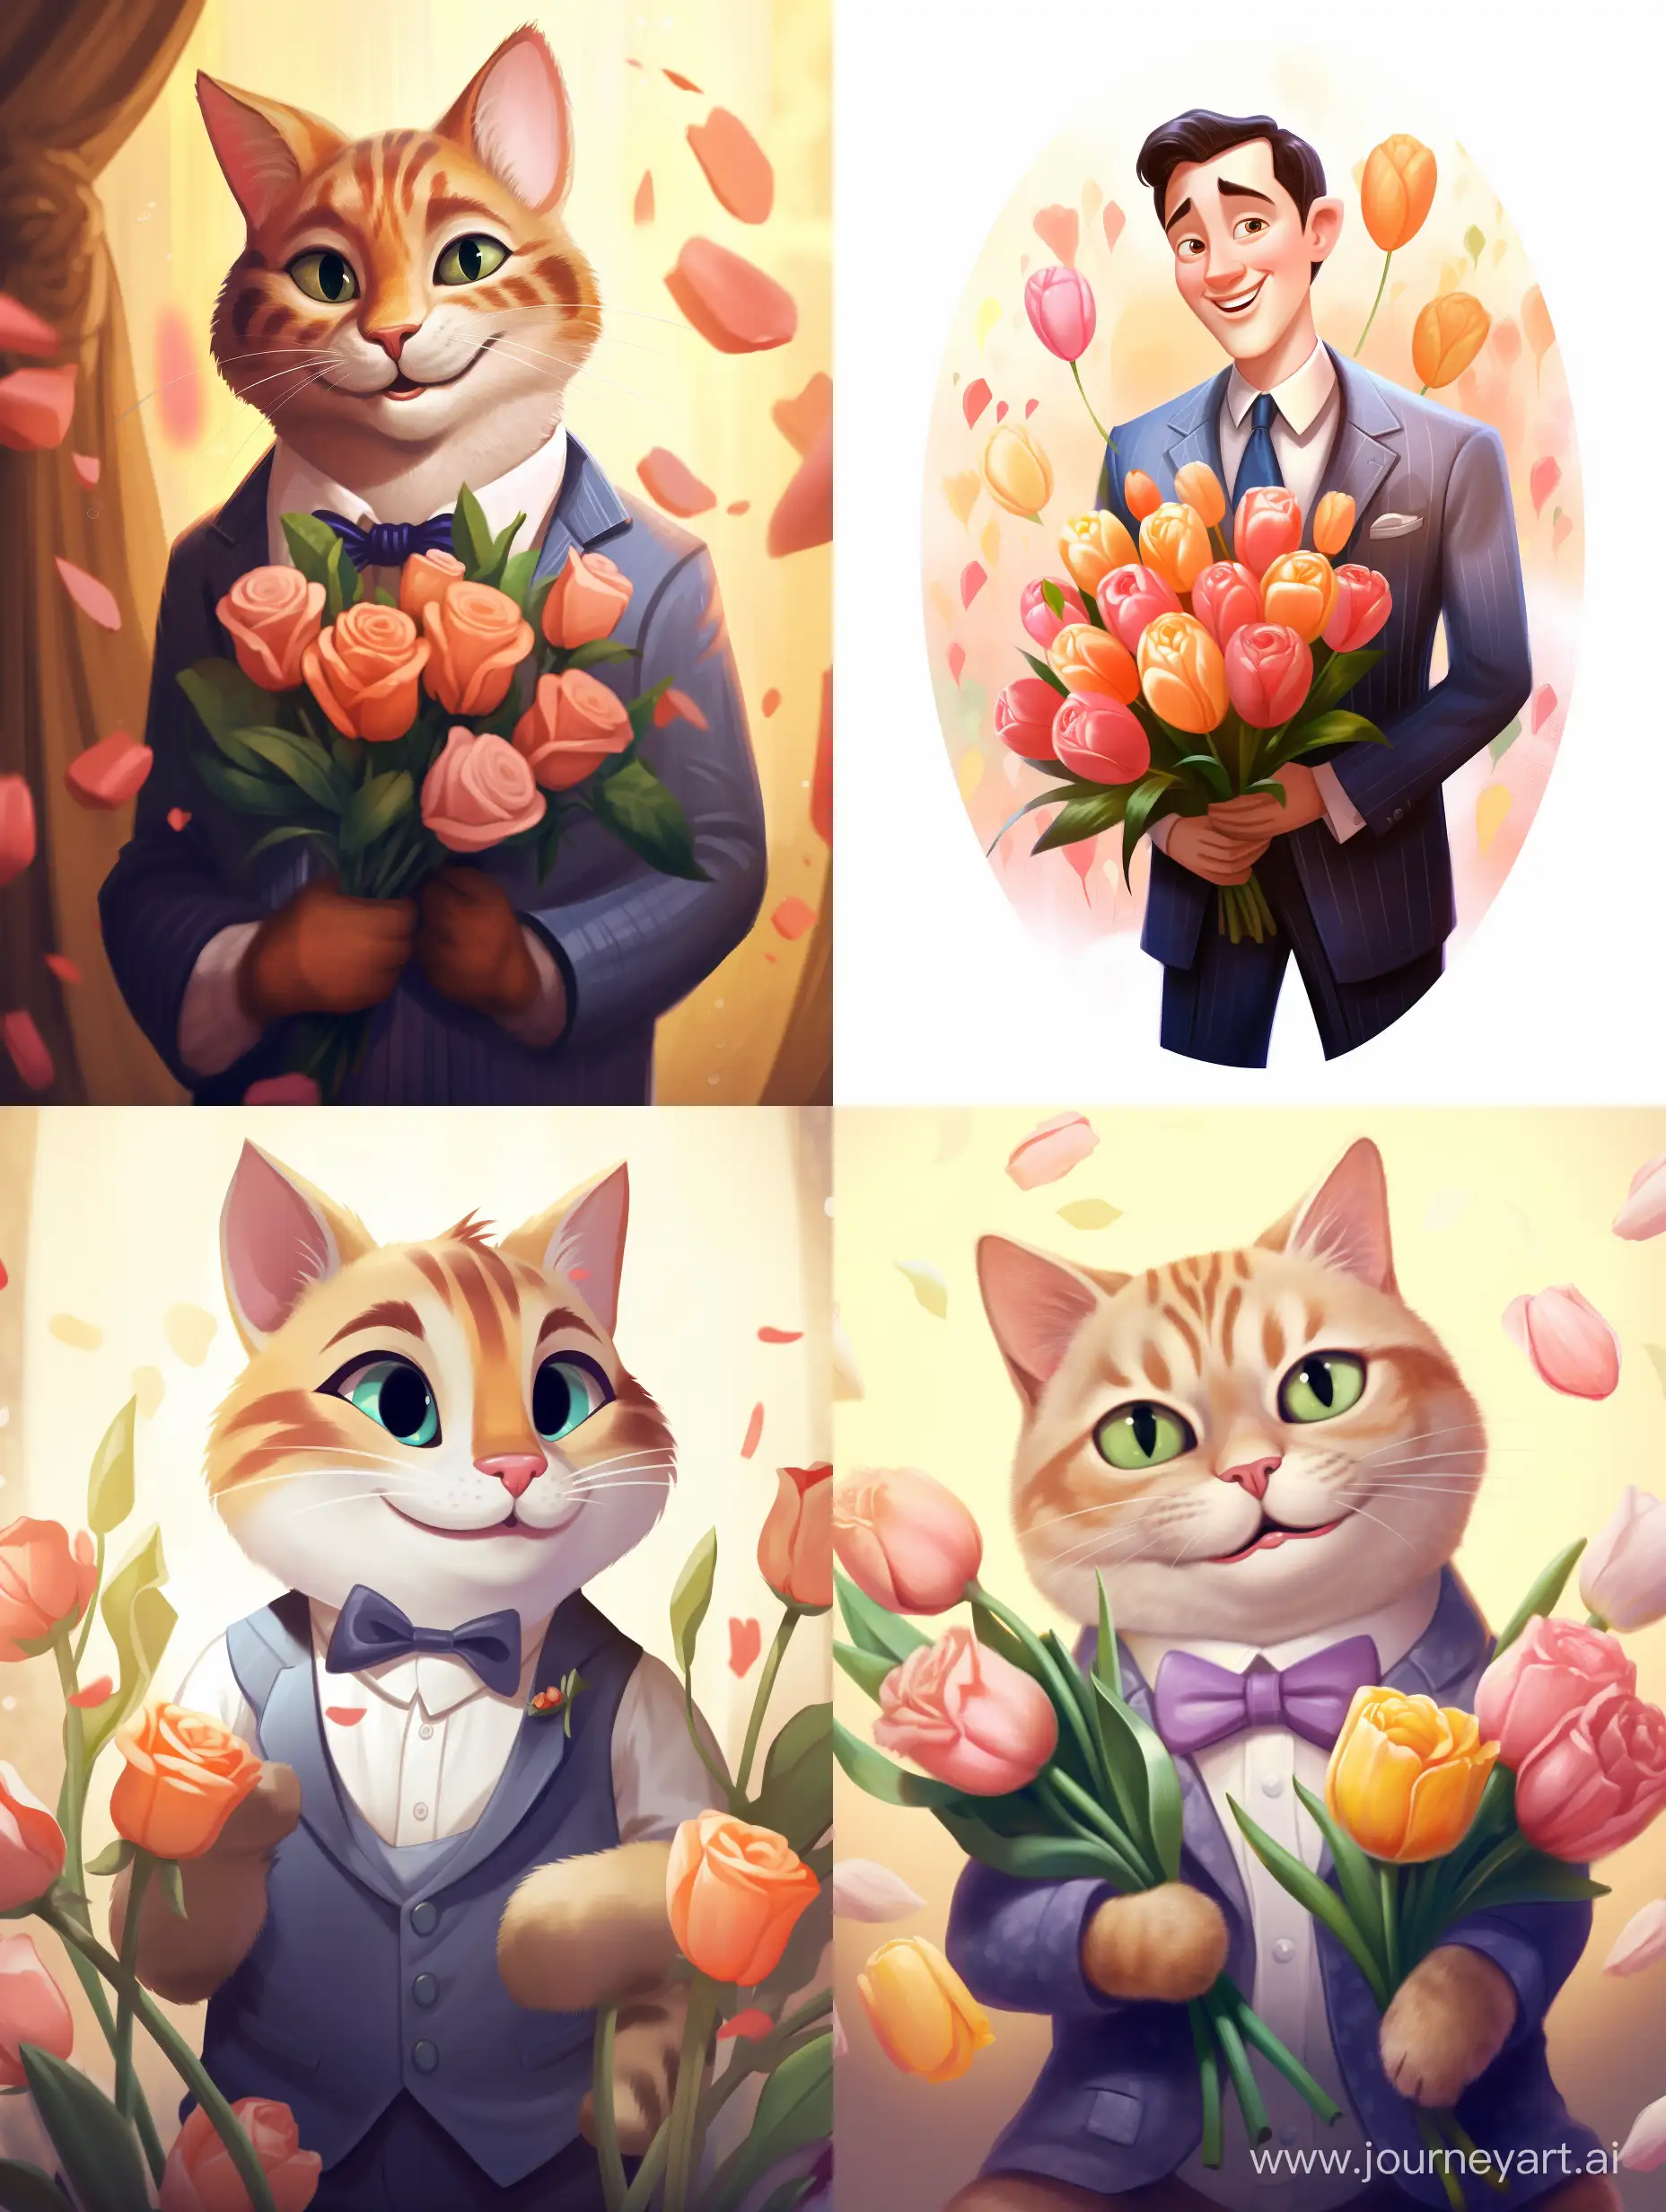 Charming-PixarStyle-Cat-in-Mens-Suit-with-Tulip-Bouquet